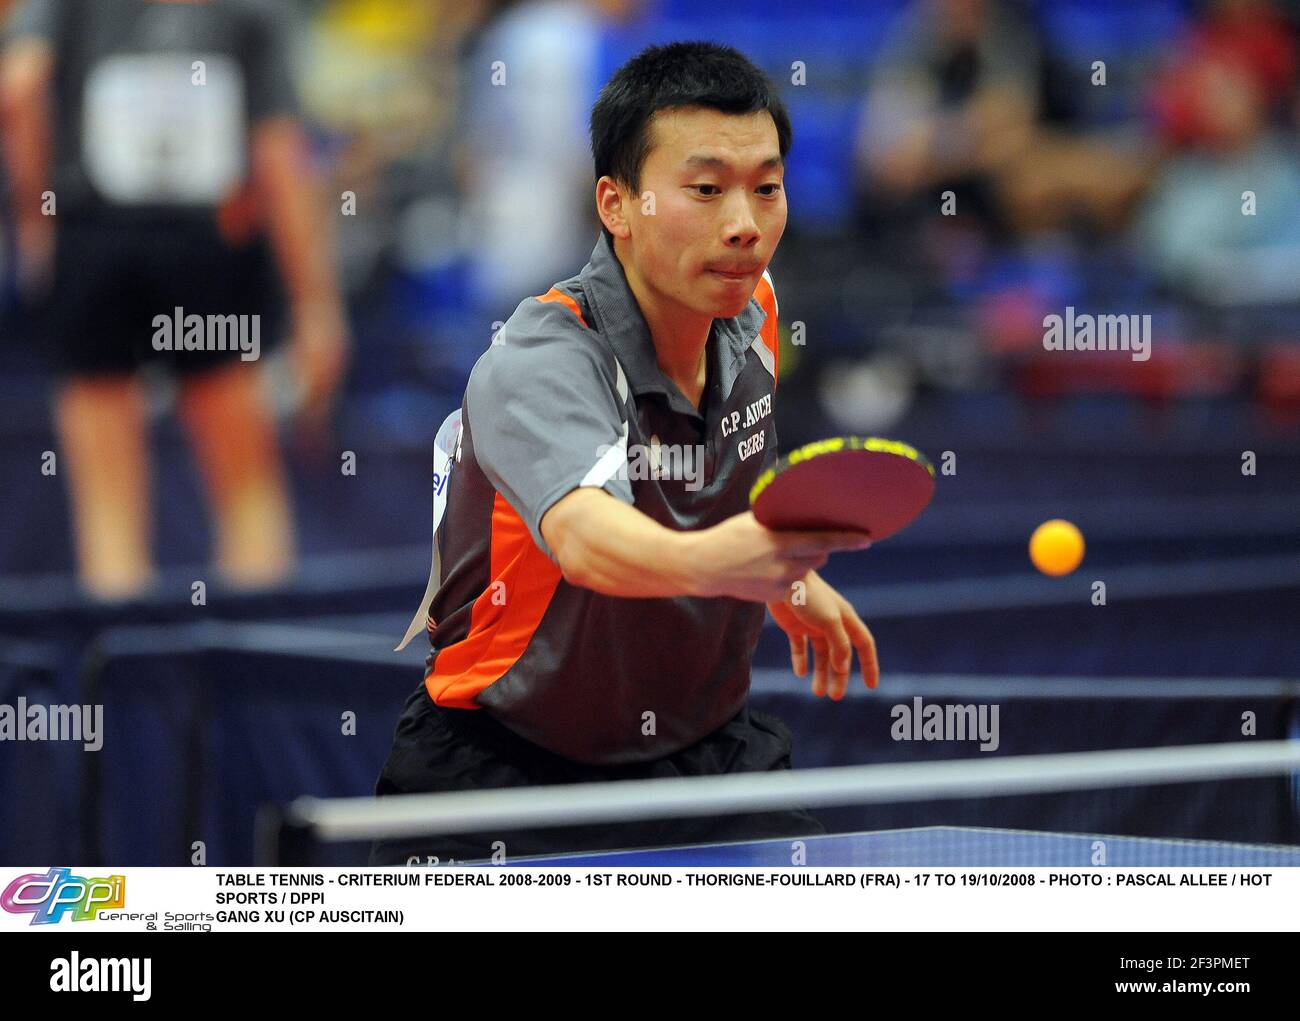 TABLE TENNIS - CRITERIUM FEDERAL 2008-2009 - 1ST ROUND - THORIGNE-FOUILLARD  (FRA) - 17 TO 19/10/2008 - PHOTO : PASCAL ALLEE / HOT SPORTS / DPPI GANG XU  (CP AUSCITAIN Stock Photo - Alamy